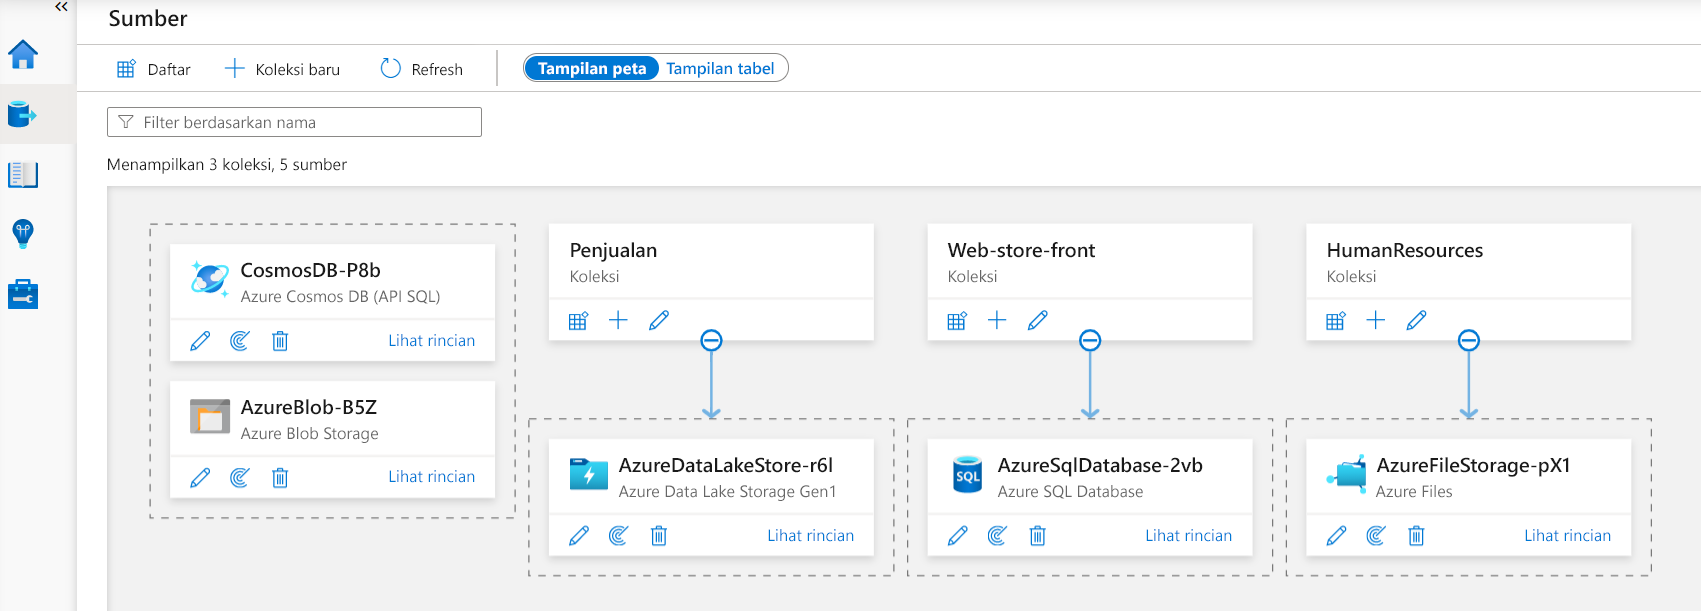 Screenshot that shows the Map view of the sources window in the Microsoft Purview governance portal. Three collections are listed, each with a single data source, and two other data sources that aren't assigned to a collection.